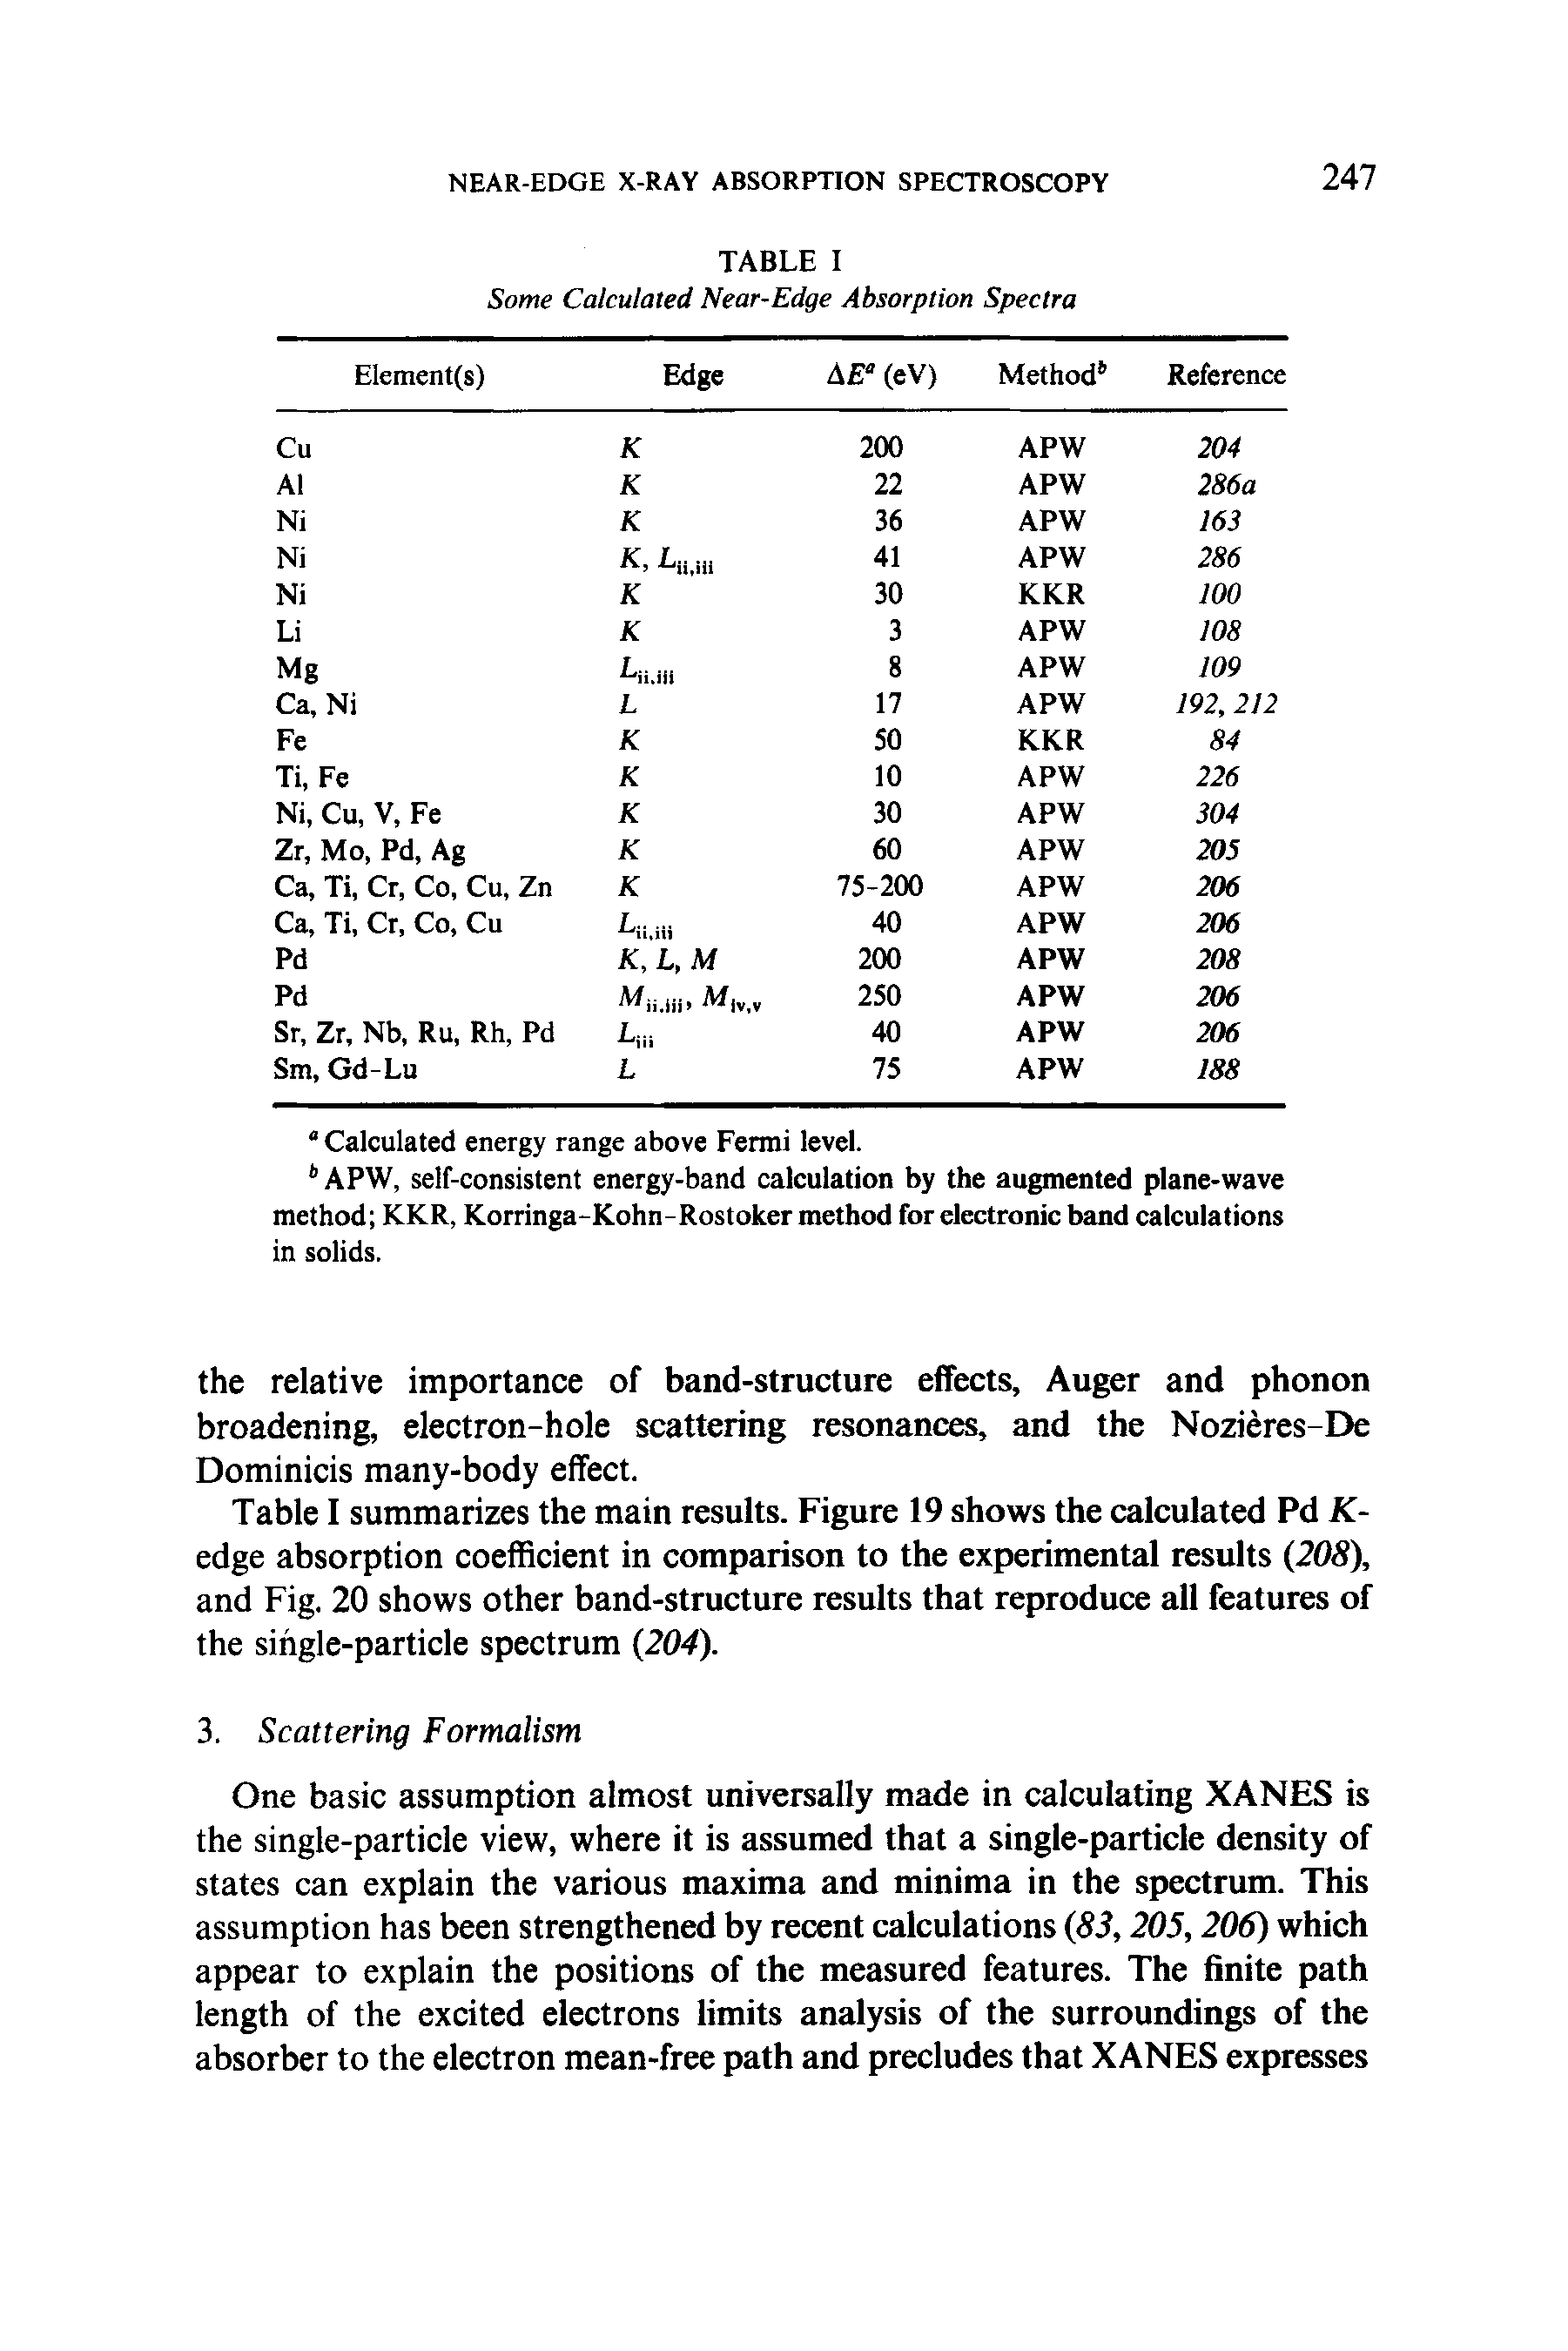 Table I summarizes the main results. Figure 19 shows the calculated Pd K-edge absorption coefficient in comparison to the experimental results (208), and Fig. 20 shows other band-structure results that reproduce all features of the single-particle spectrum (204).